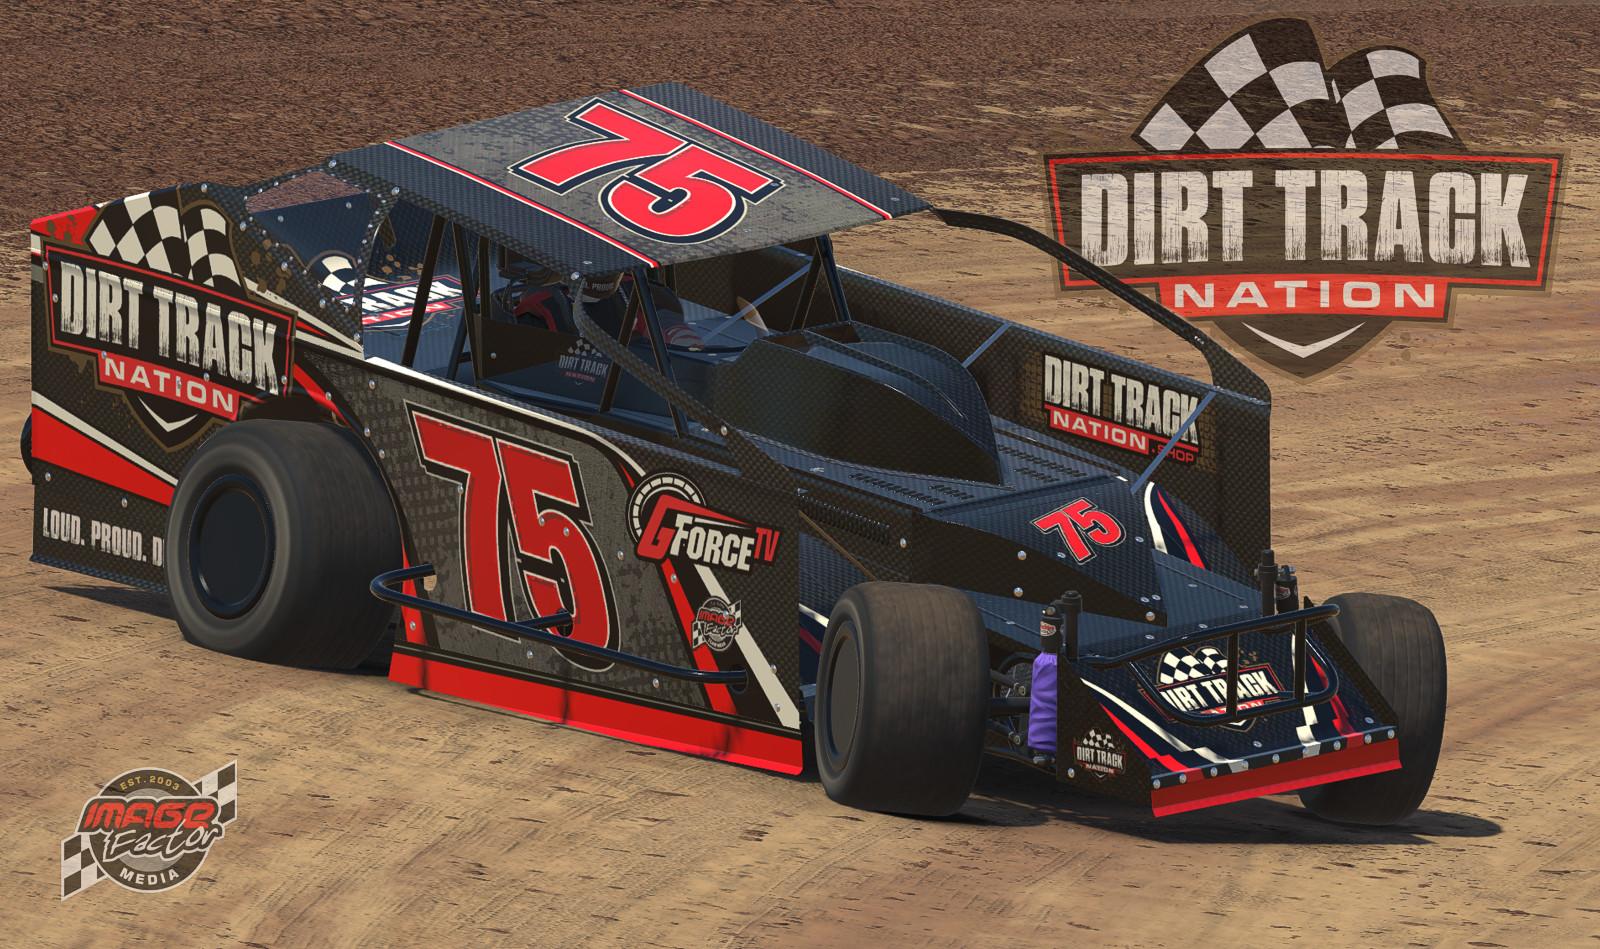 Preview of Dirt Track Nation Big Block / 358 Modified  by Greg Calnan